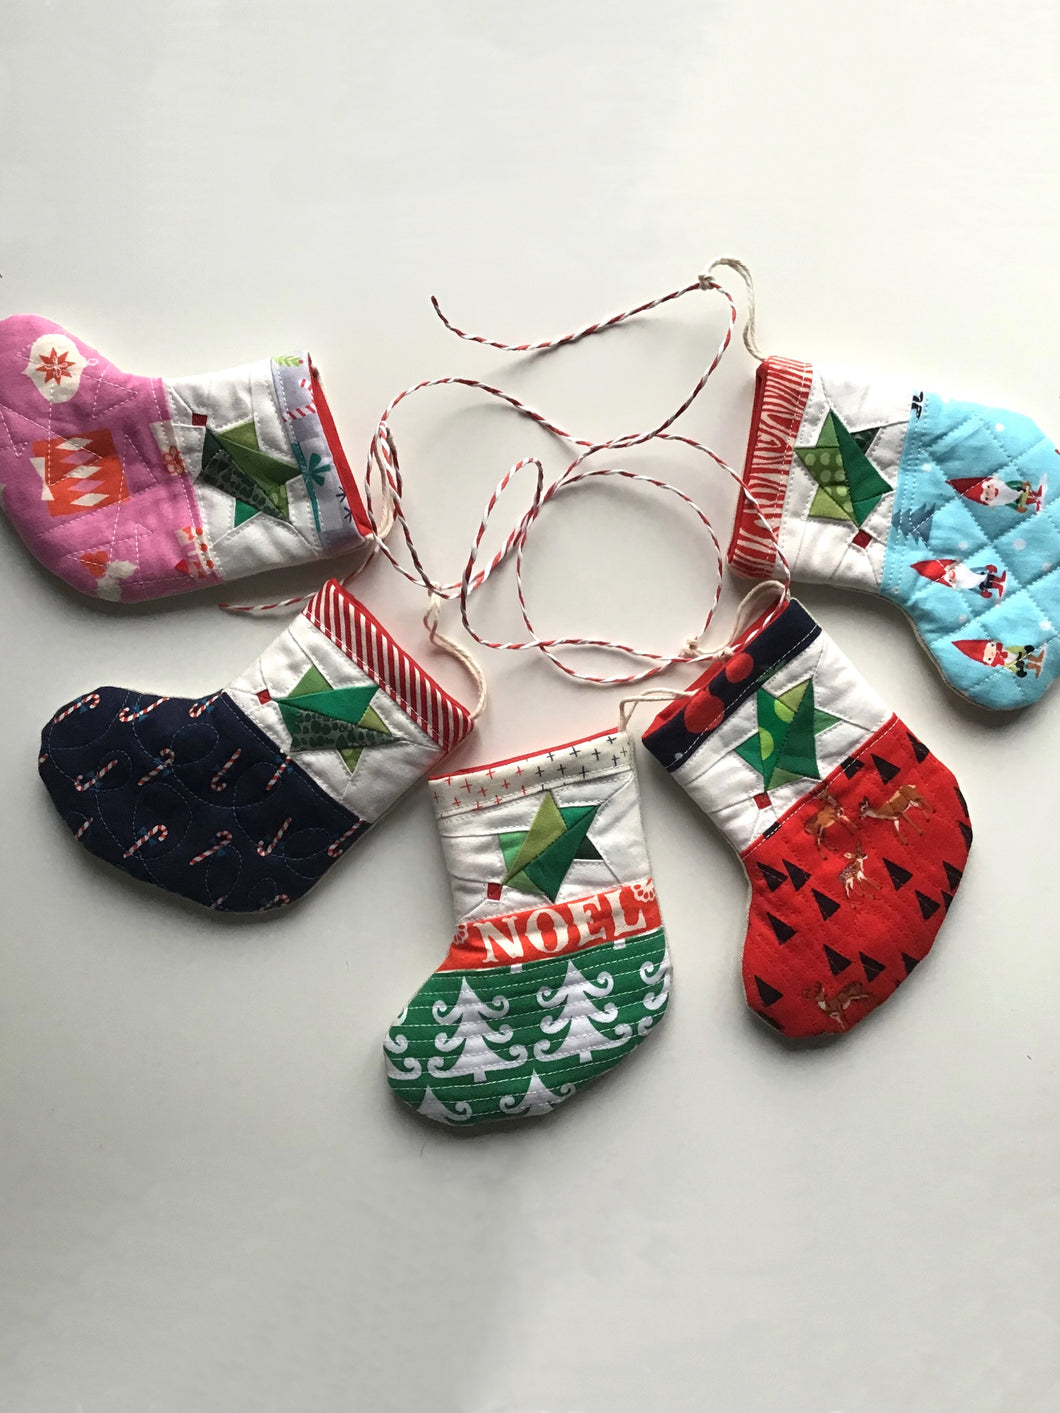 Handmade mini quilted Christmas stocking bunting with holly leaf design. 